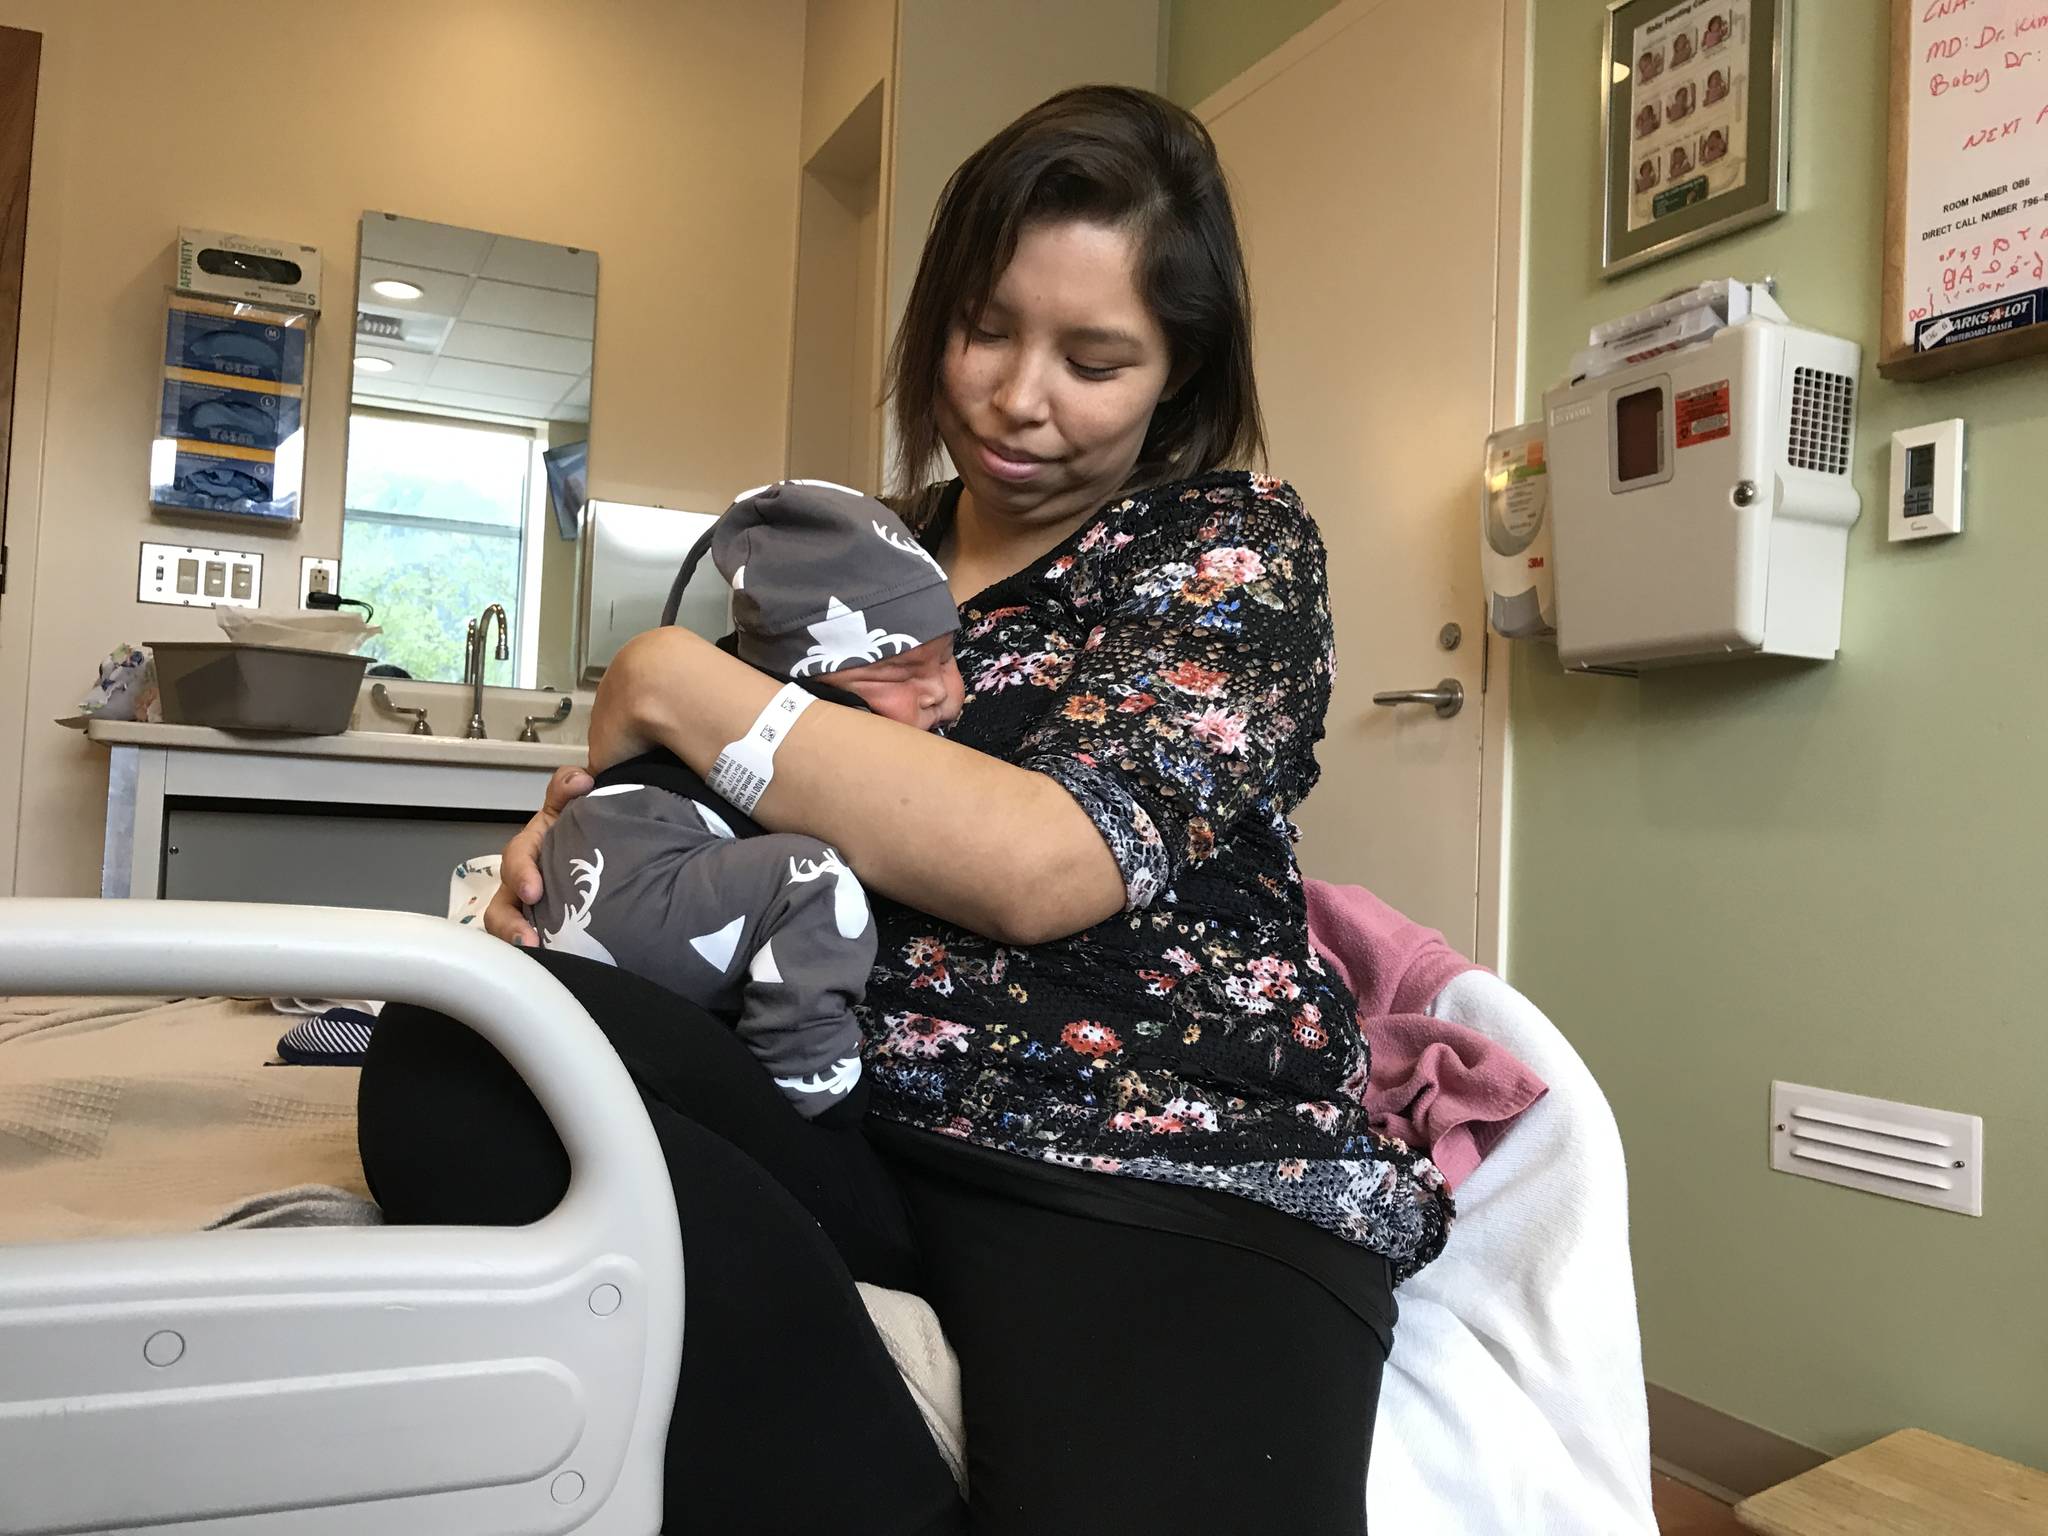 Kara James holds her newborn baby, Andrew Price Jr., at Bartlett Regional Hospital on Saturday. The day before, James received a scholarship that will allow her to attend college and pursue her goal of becoming a teacher in her hometown of Angoon. (Alex McCarthy | Juneau Empire)